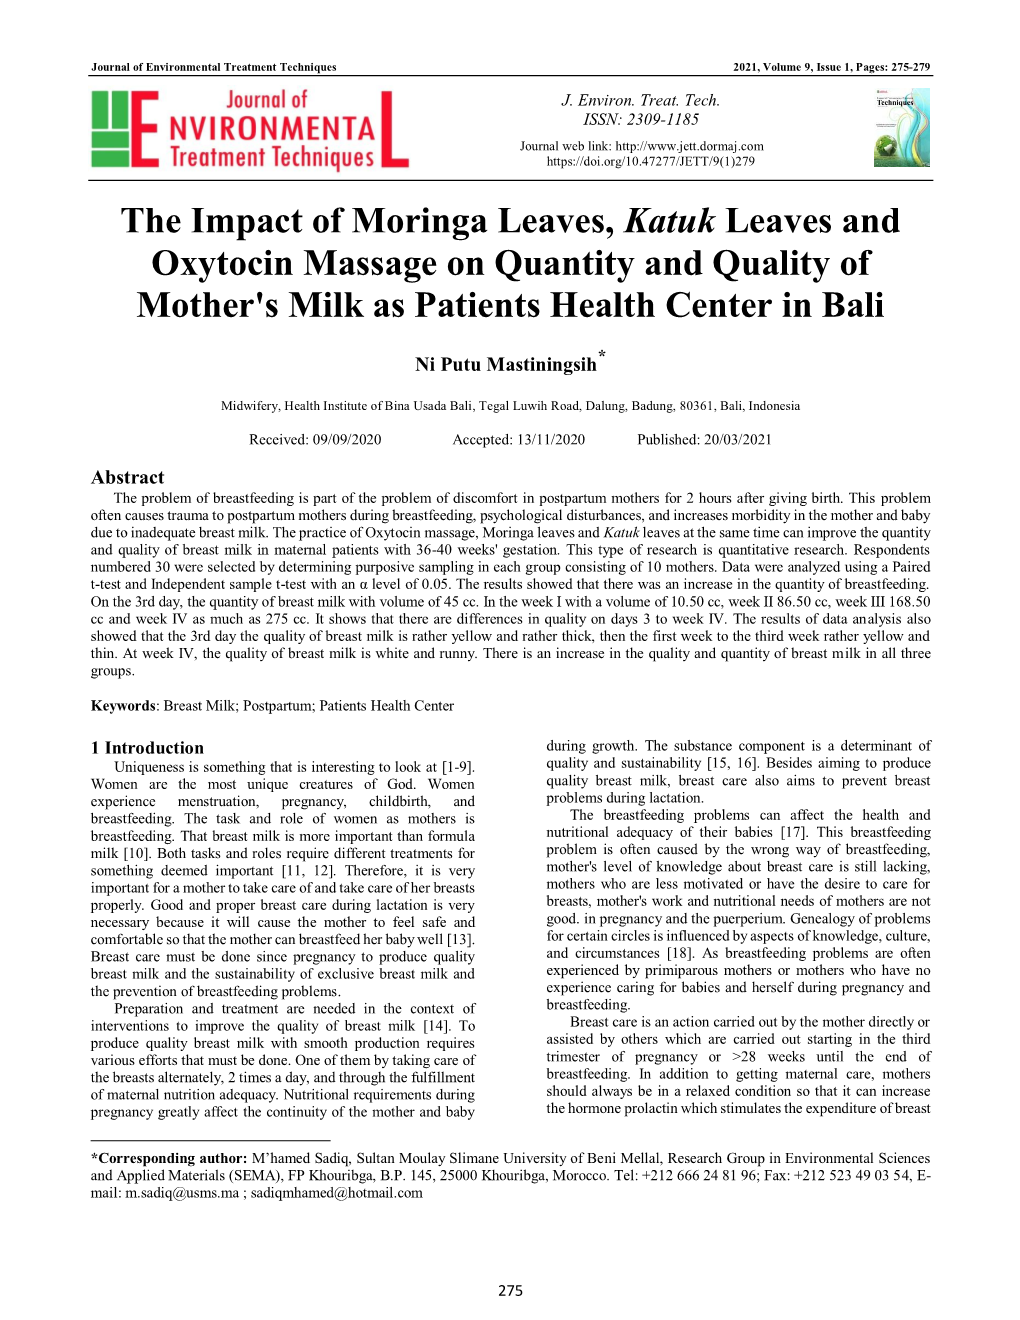 The Impact of Moringa Leaves, Katuk Leaves and Oxytocin Massage on Quantity and Quality of Mother's Milk As Patients Health Center in Bali